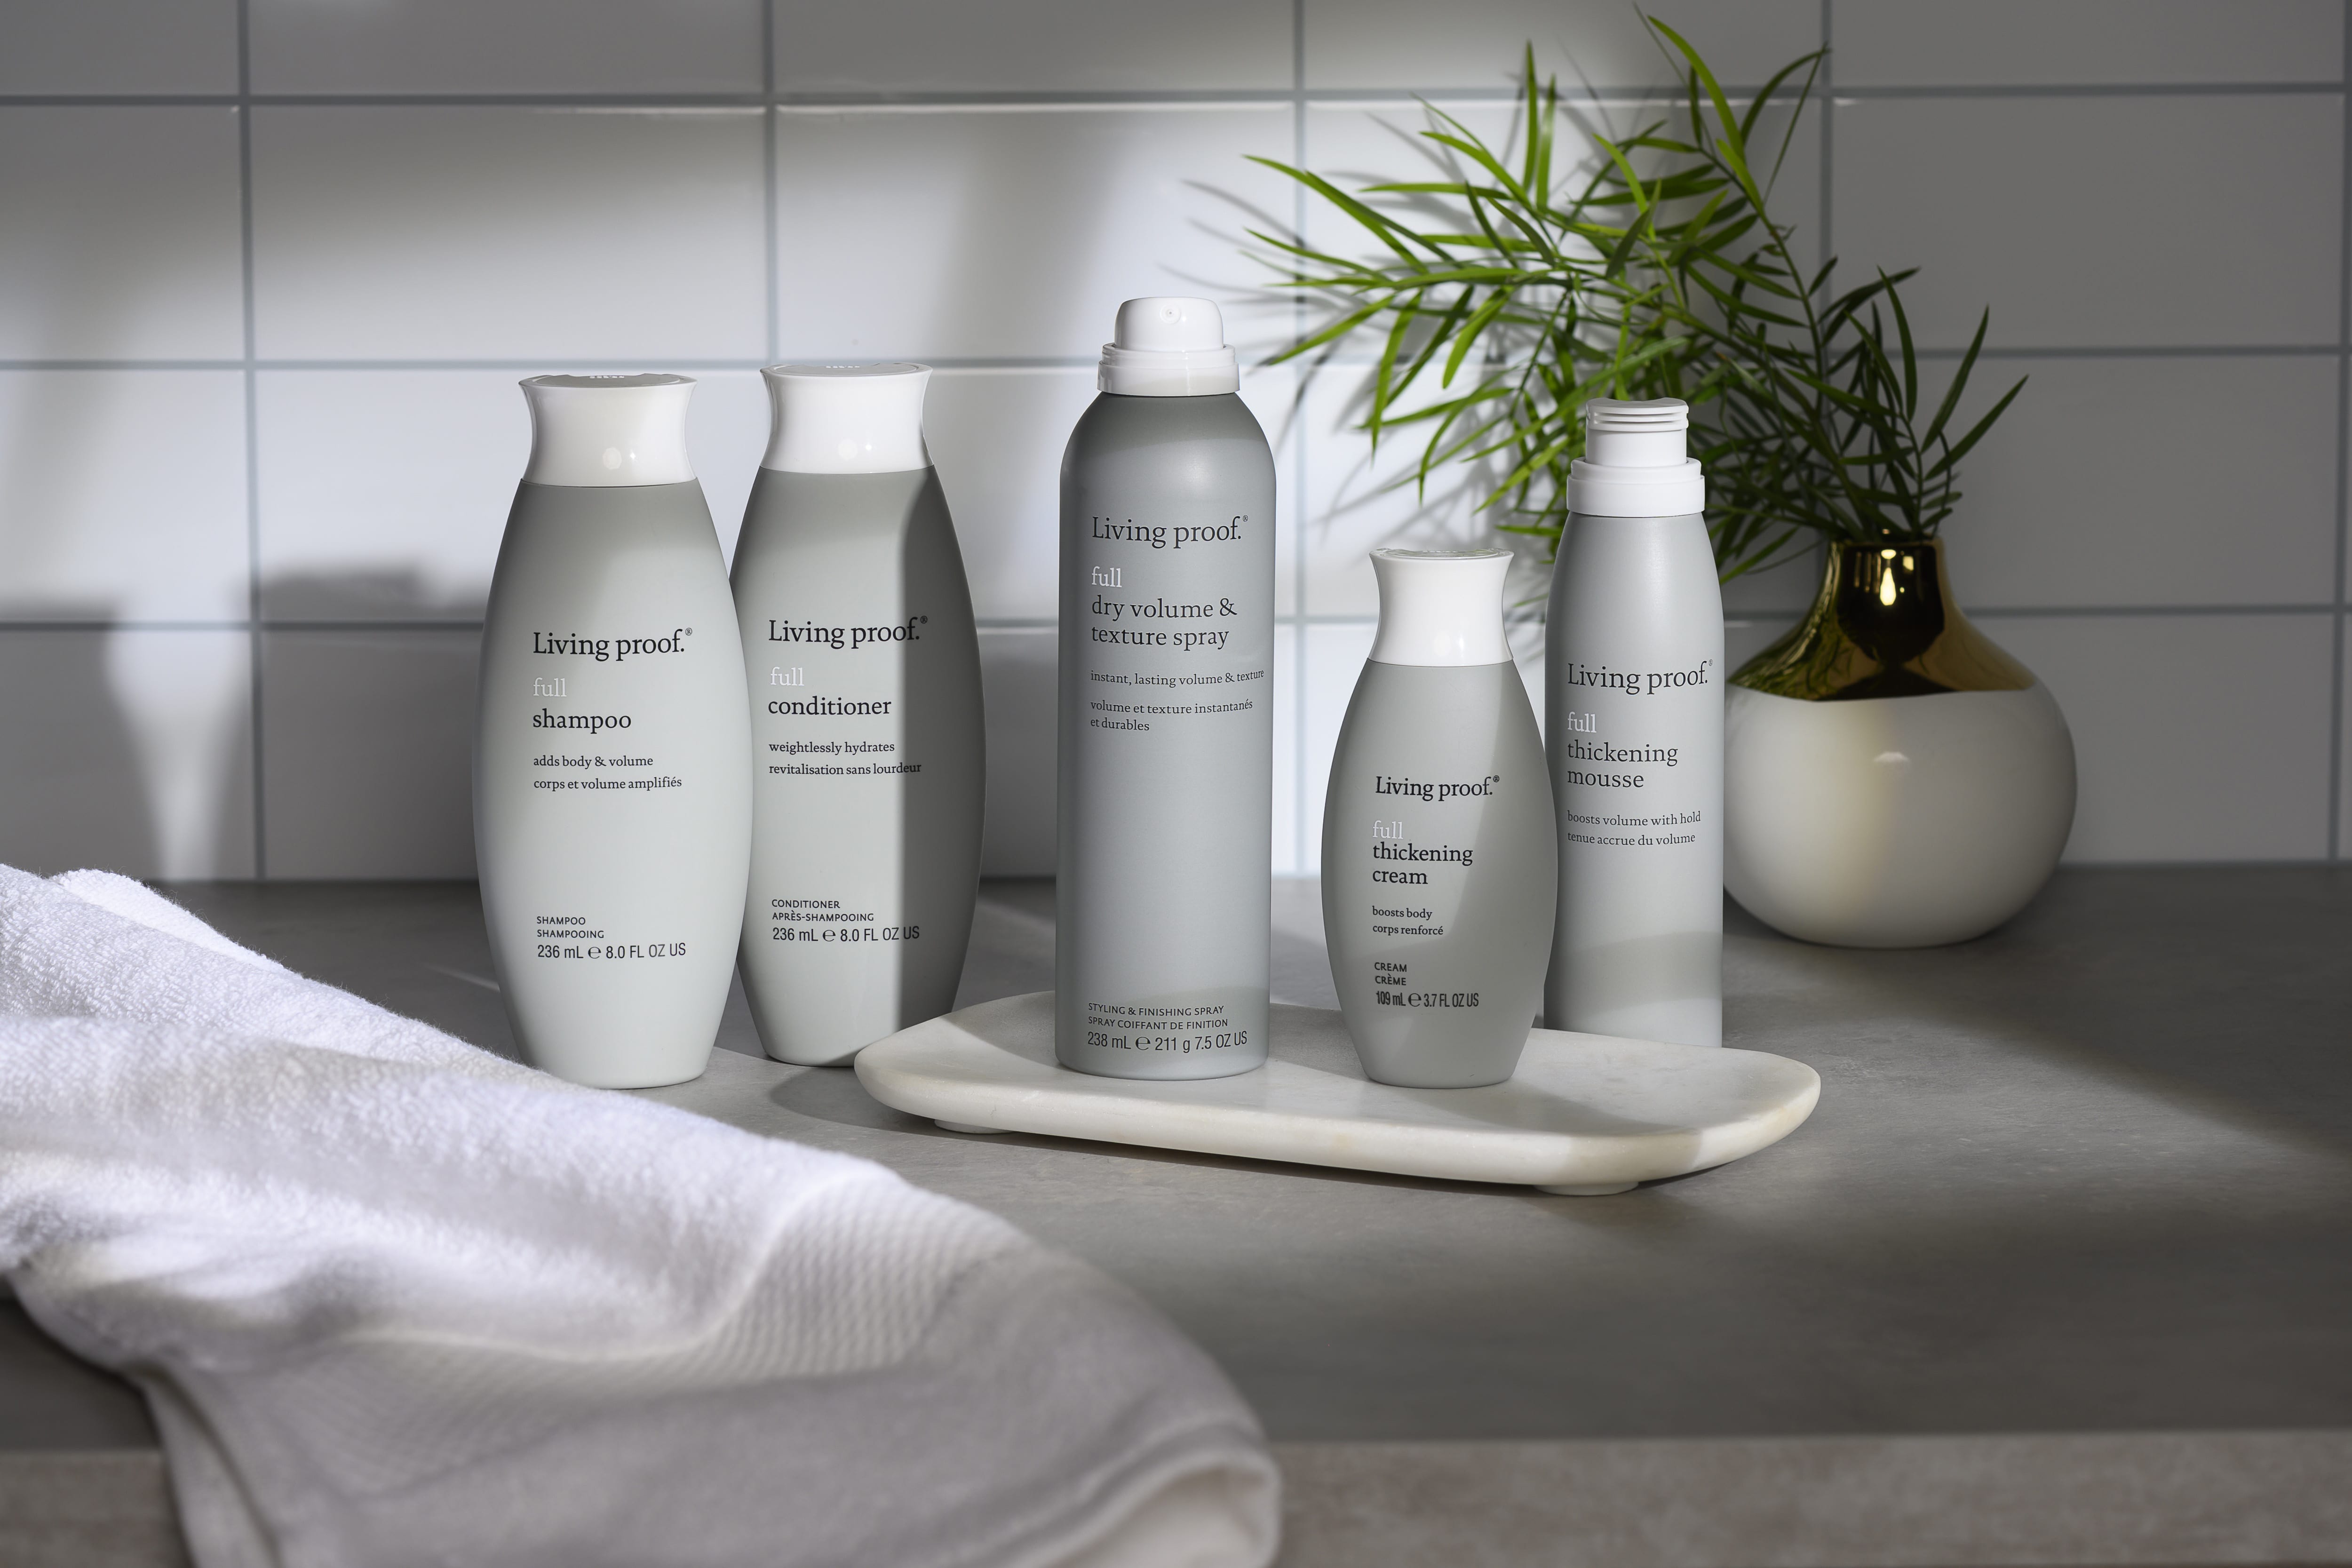 Living Proof offers a range of science-backed prestige hair care products [Image: Unilever/Living Proof]